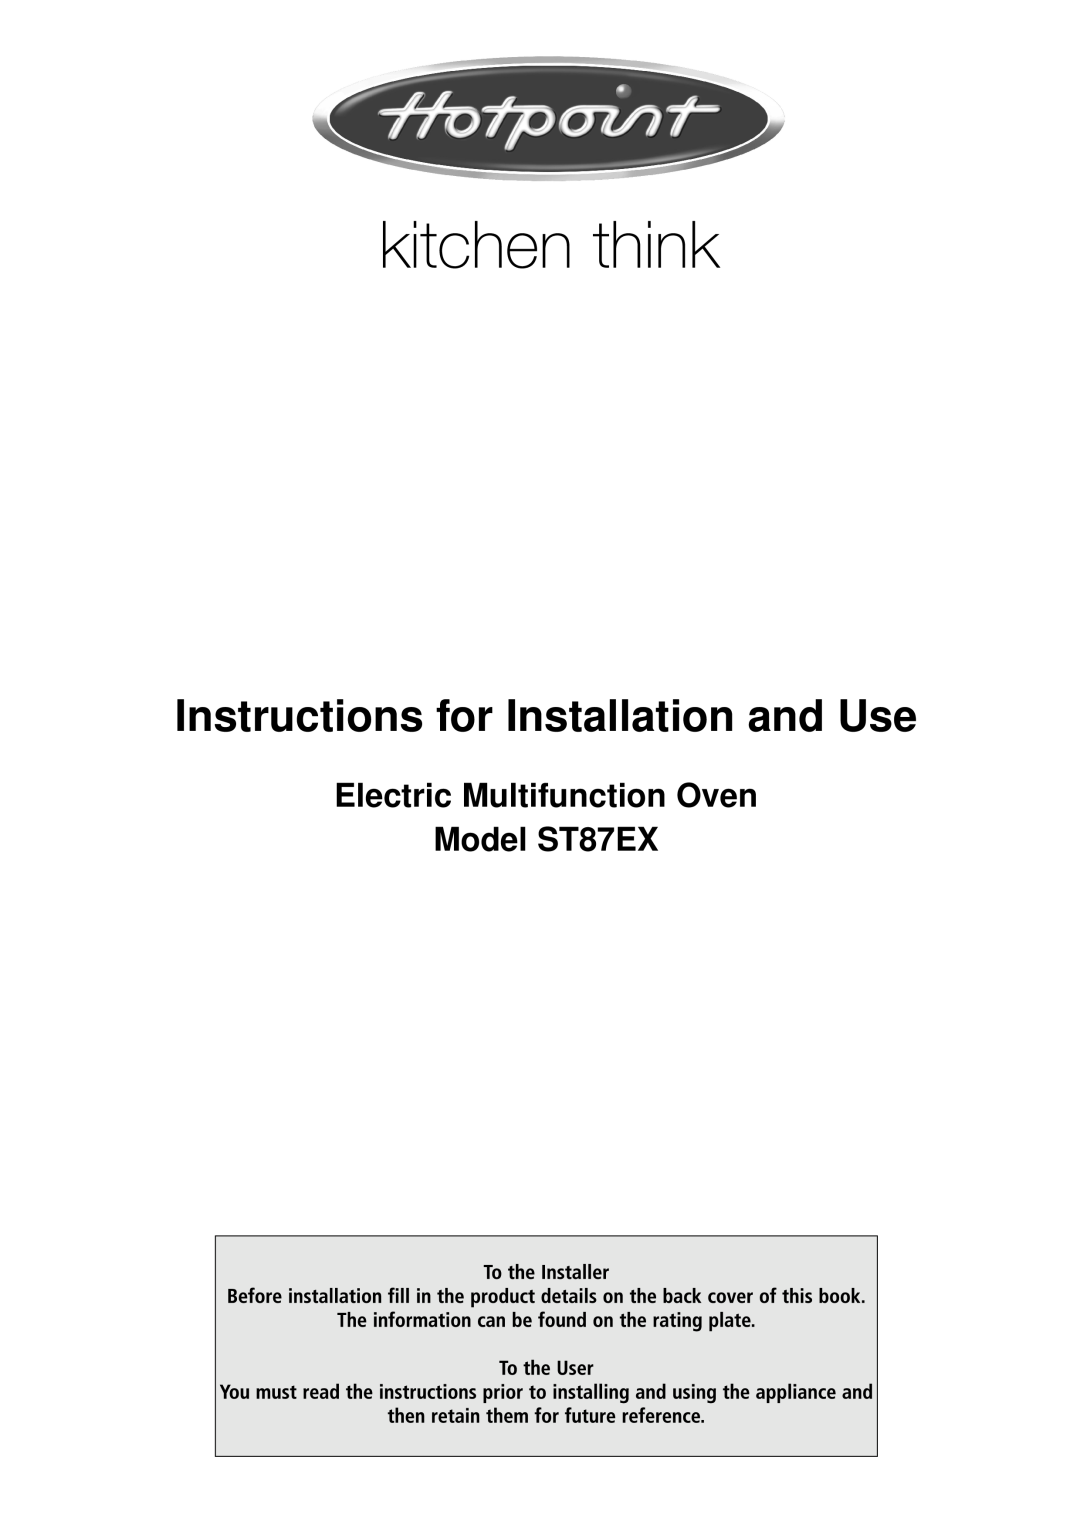 Hotpoint manual Electric Multifunction Oven Model ST87EX, Instructions for Installation and Use 